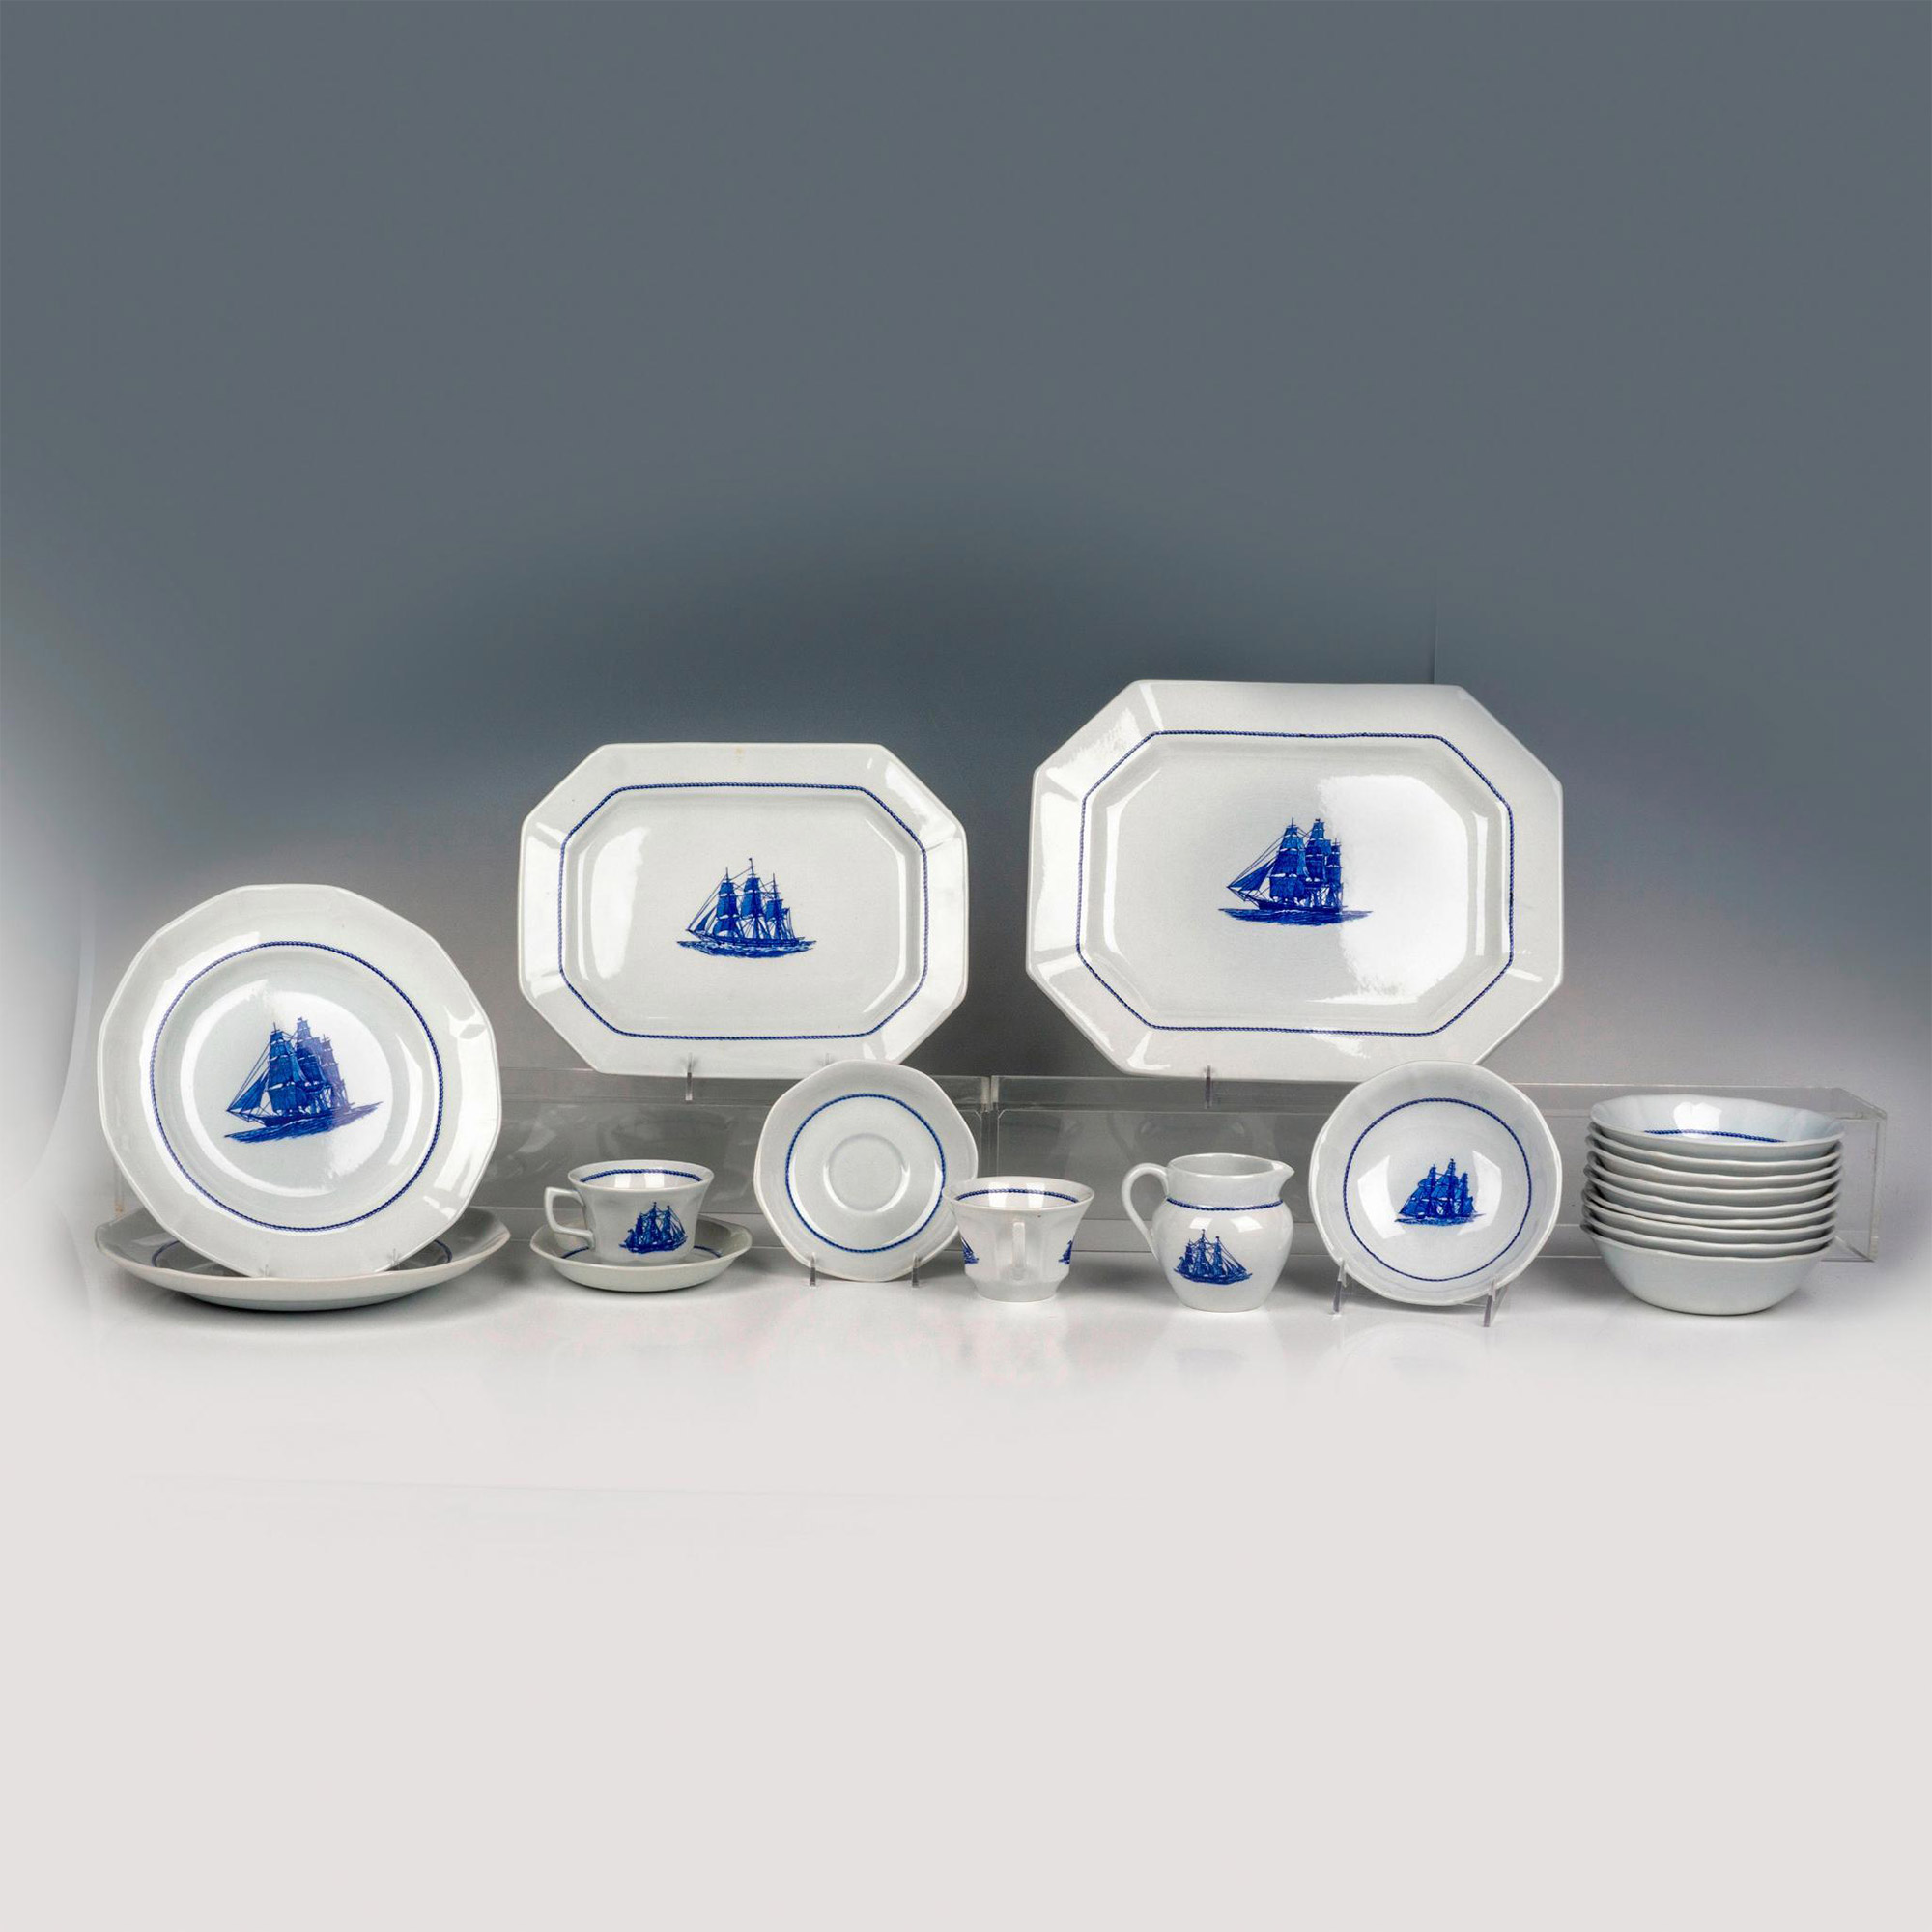 19pc Wedgwood Ceramic American Clipper Table Set - Image 2 of 3